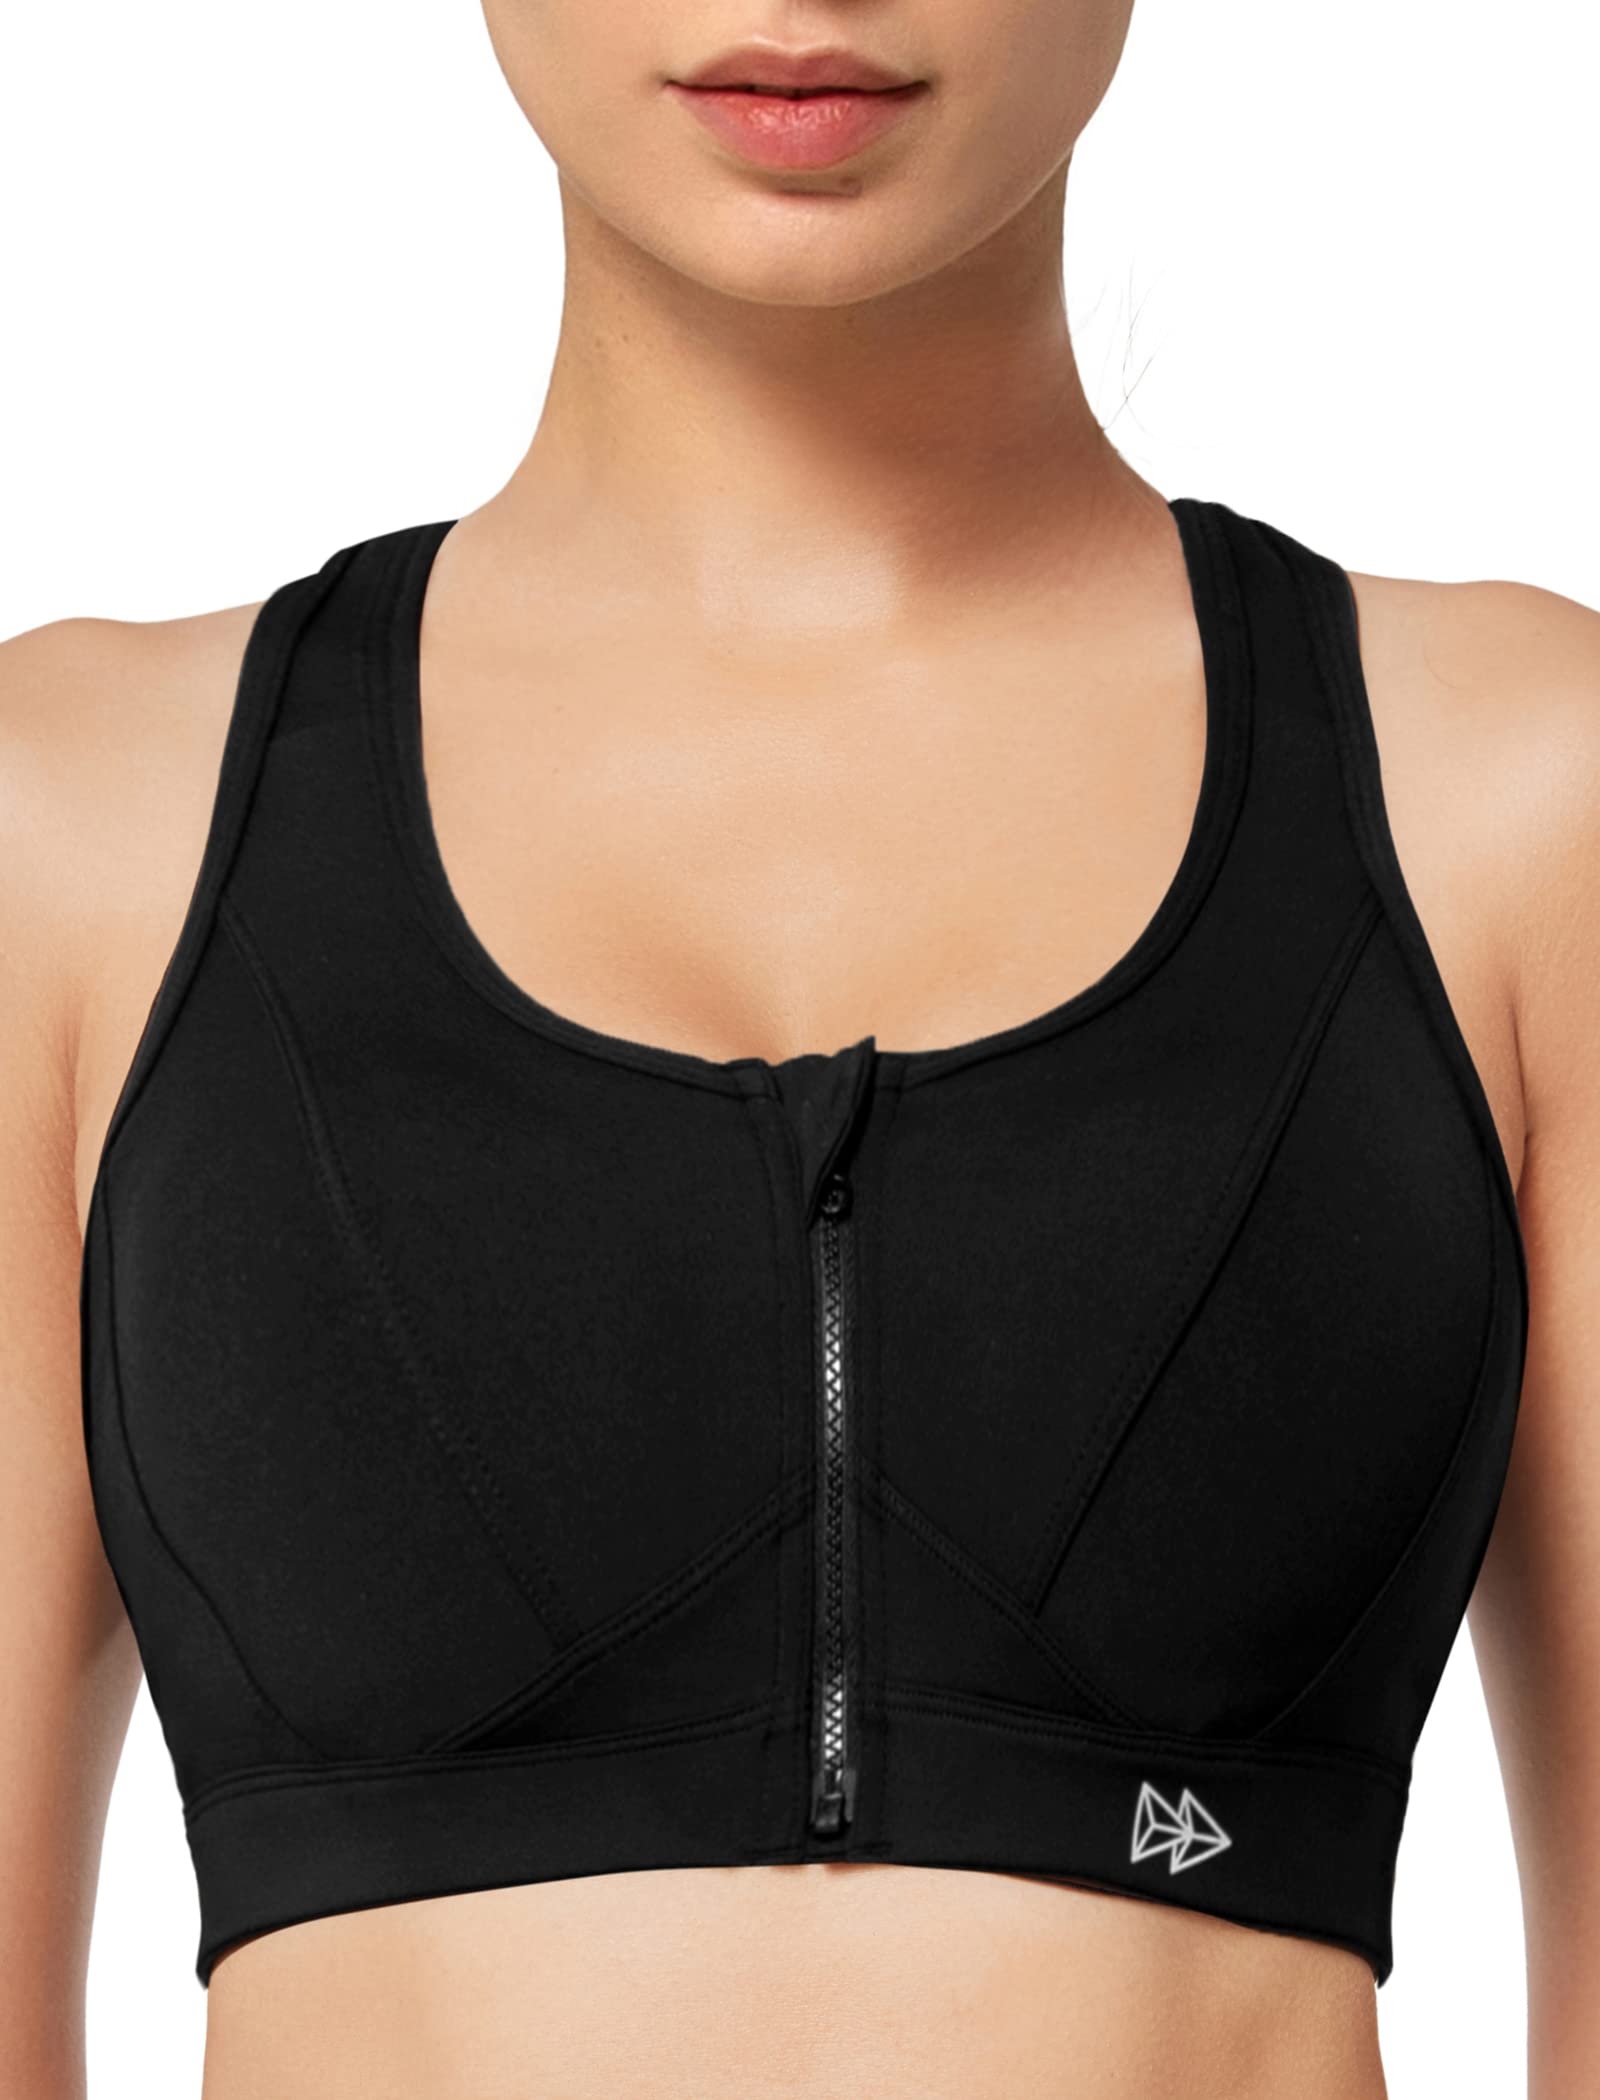 17 of the Best Sports Bras For Big Busts  Best sports bras, High impact  sports bra, Sports bra